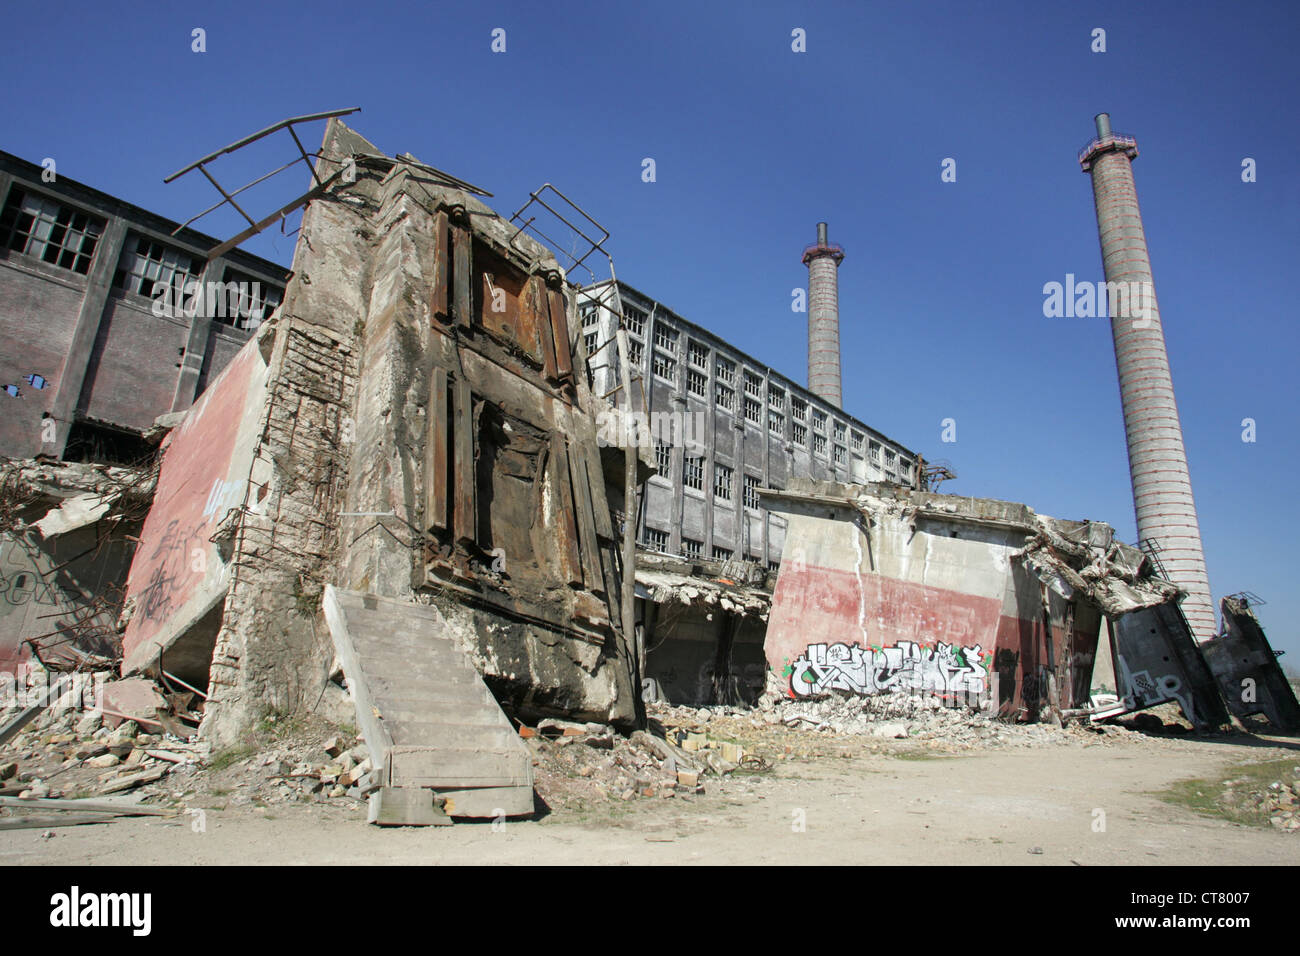 Remains of a chemical plant in the eastern states Stock Photo